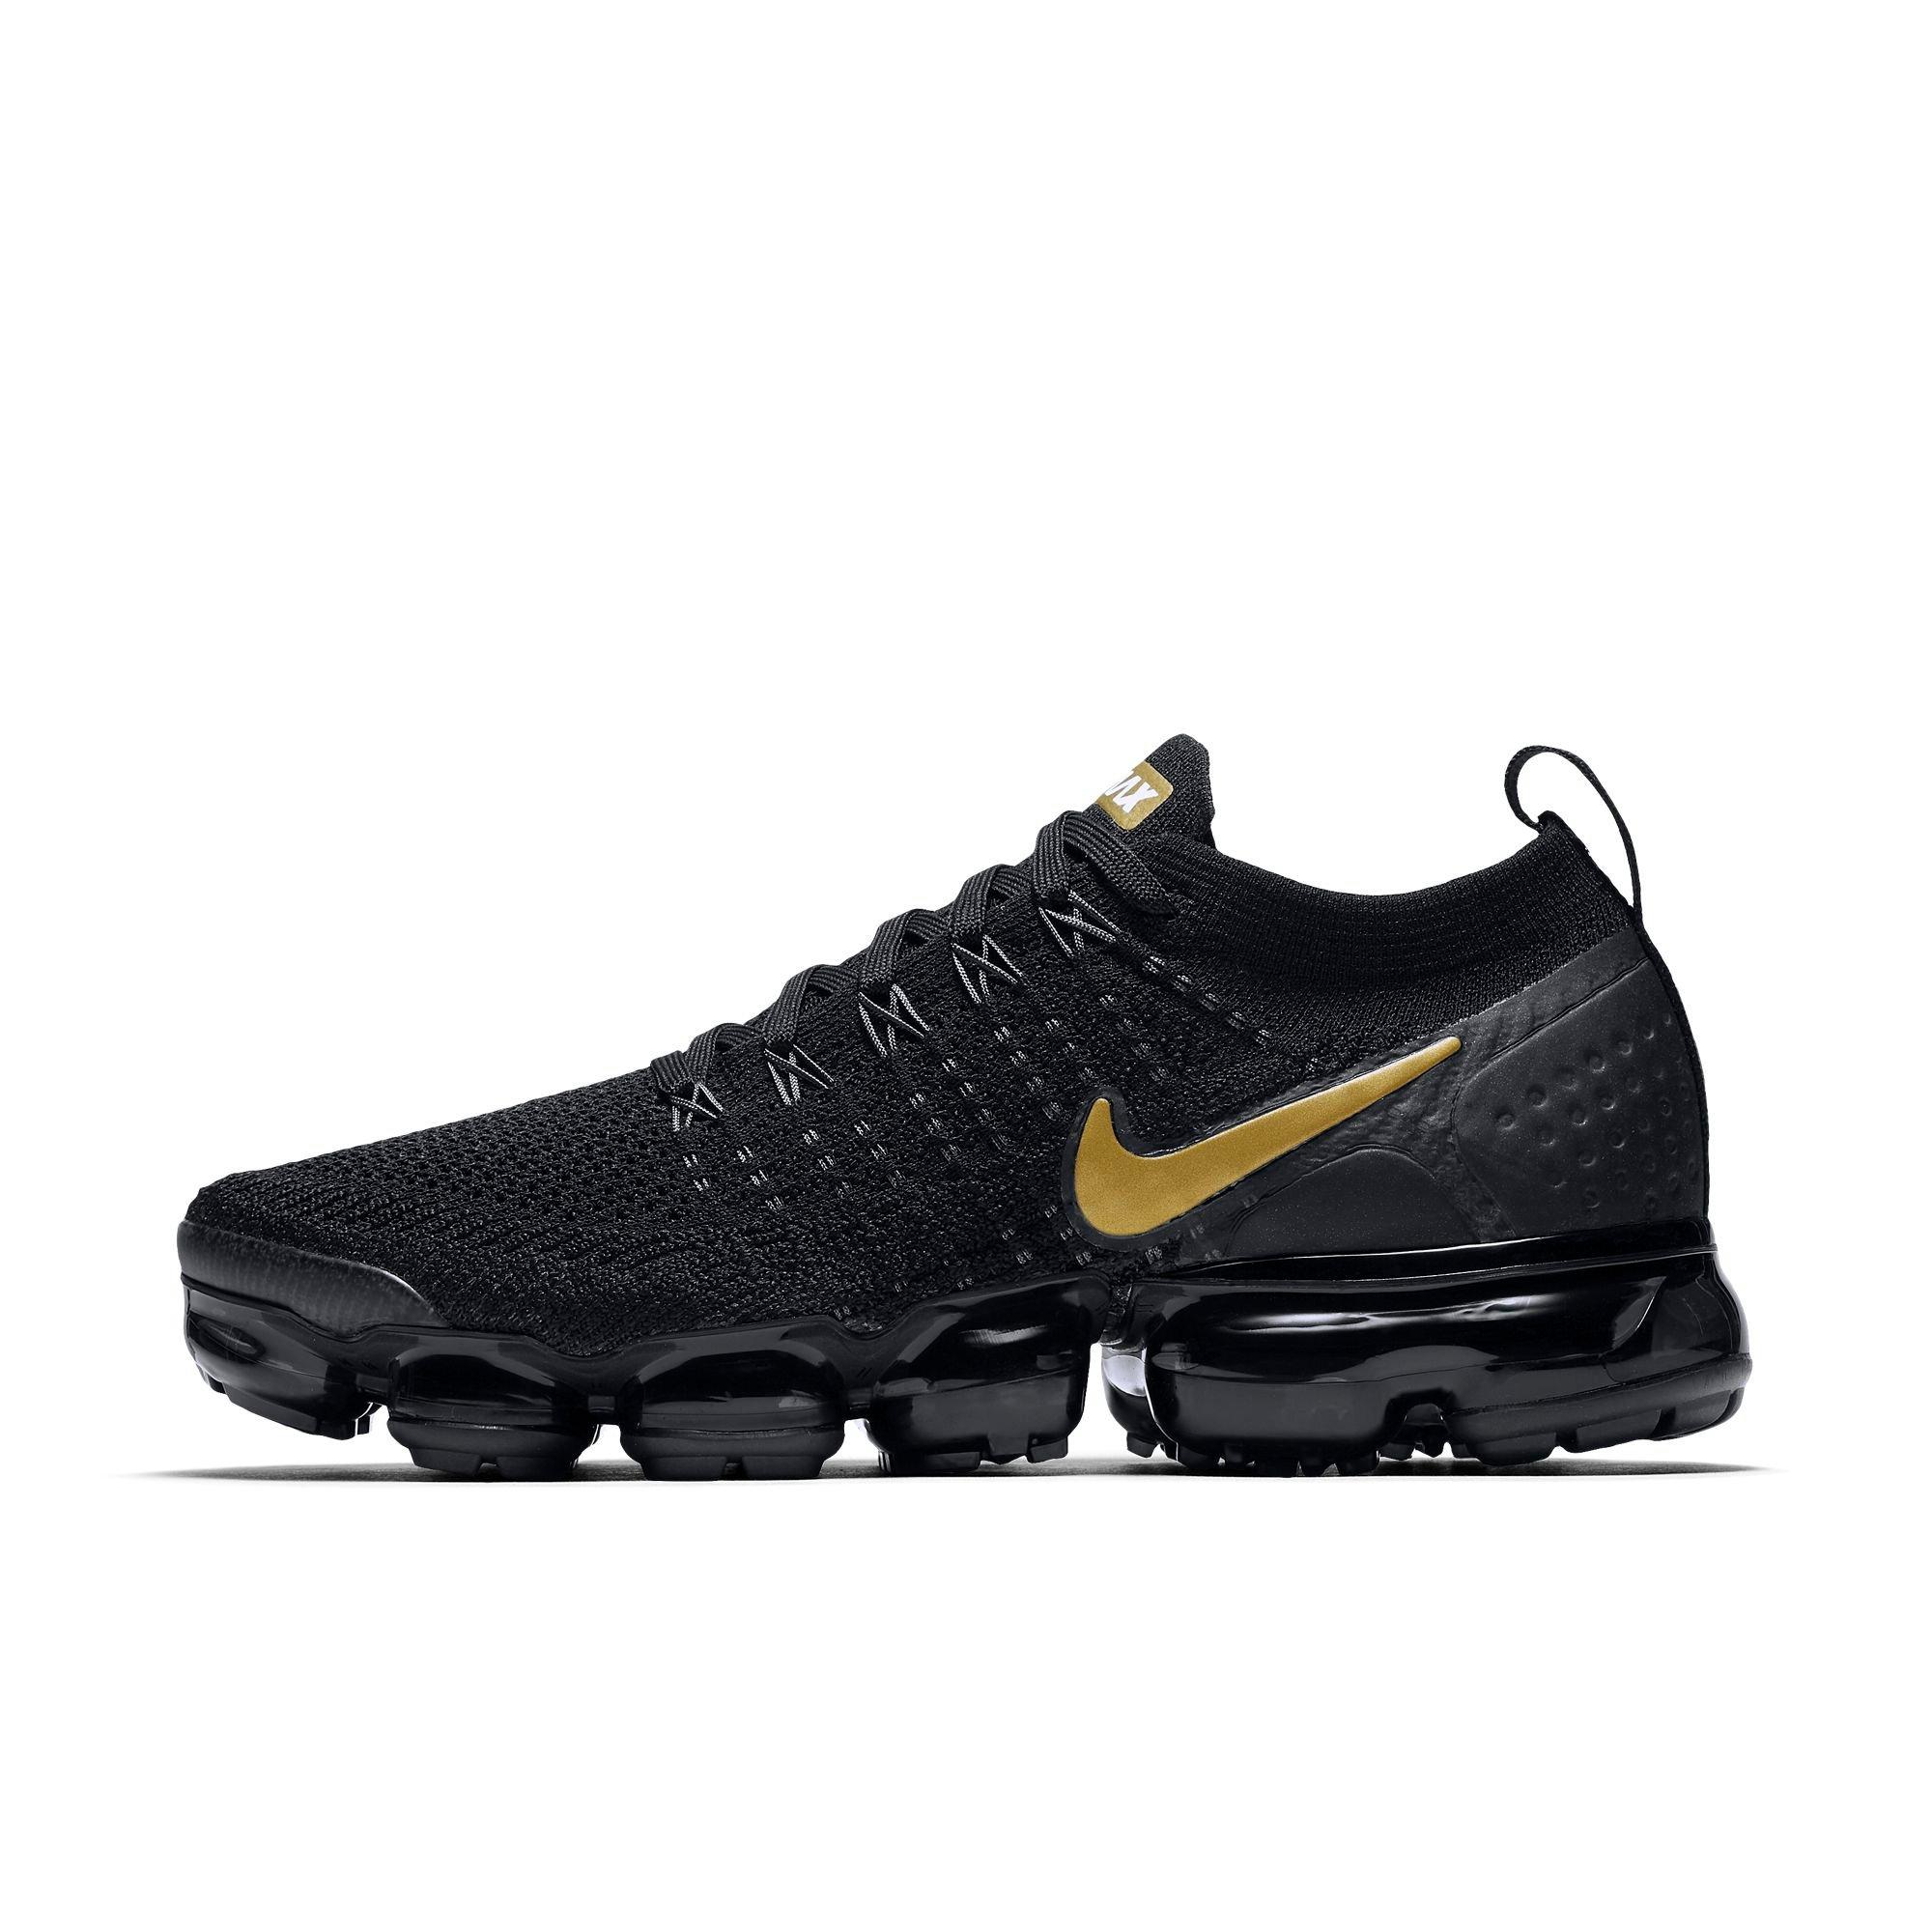 nike air vapormax women's black and gold